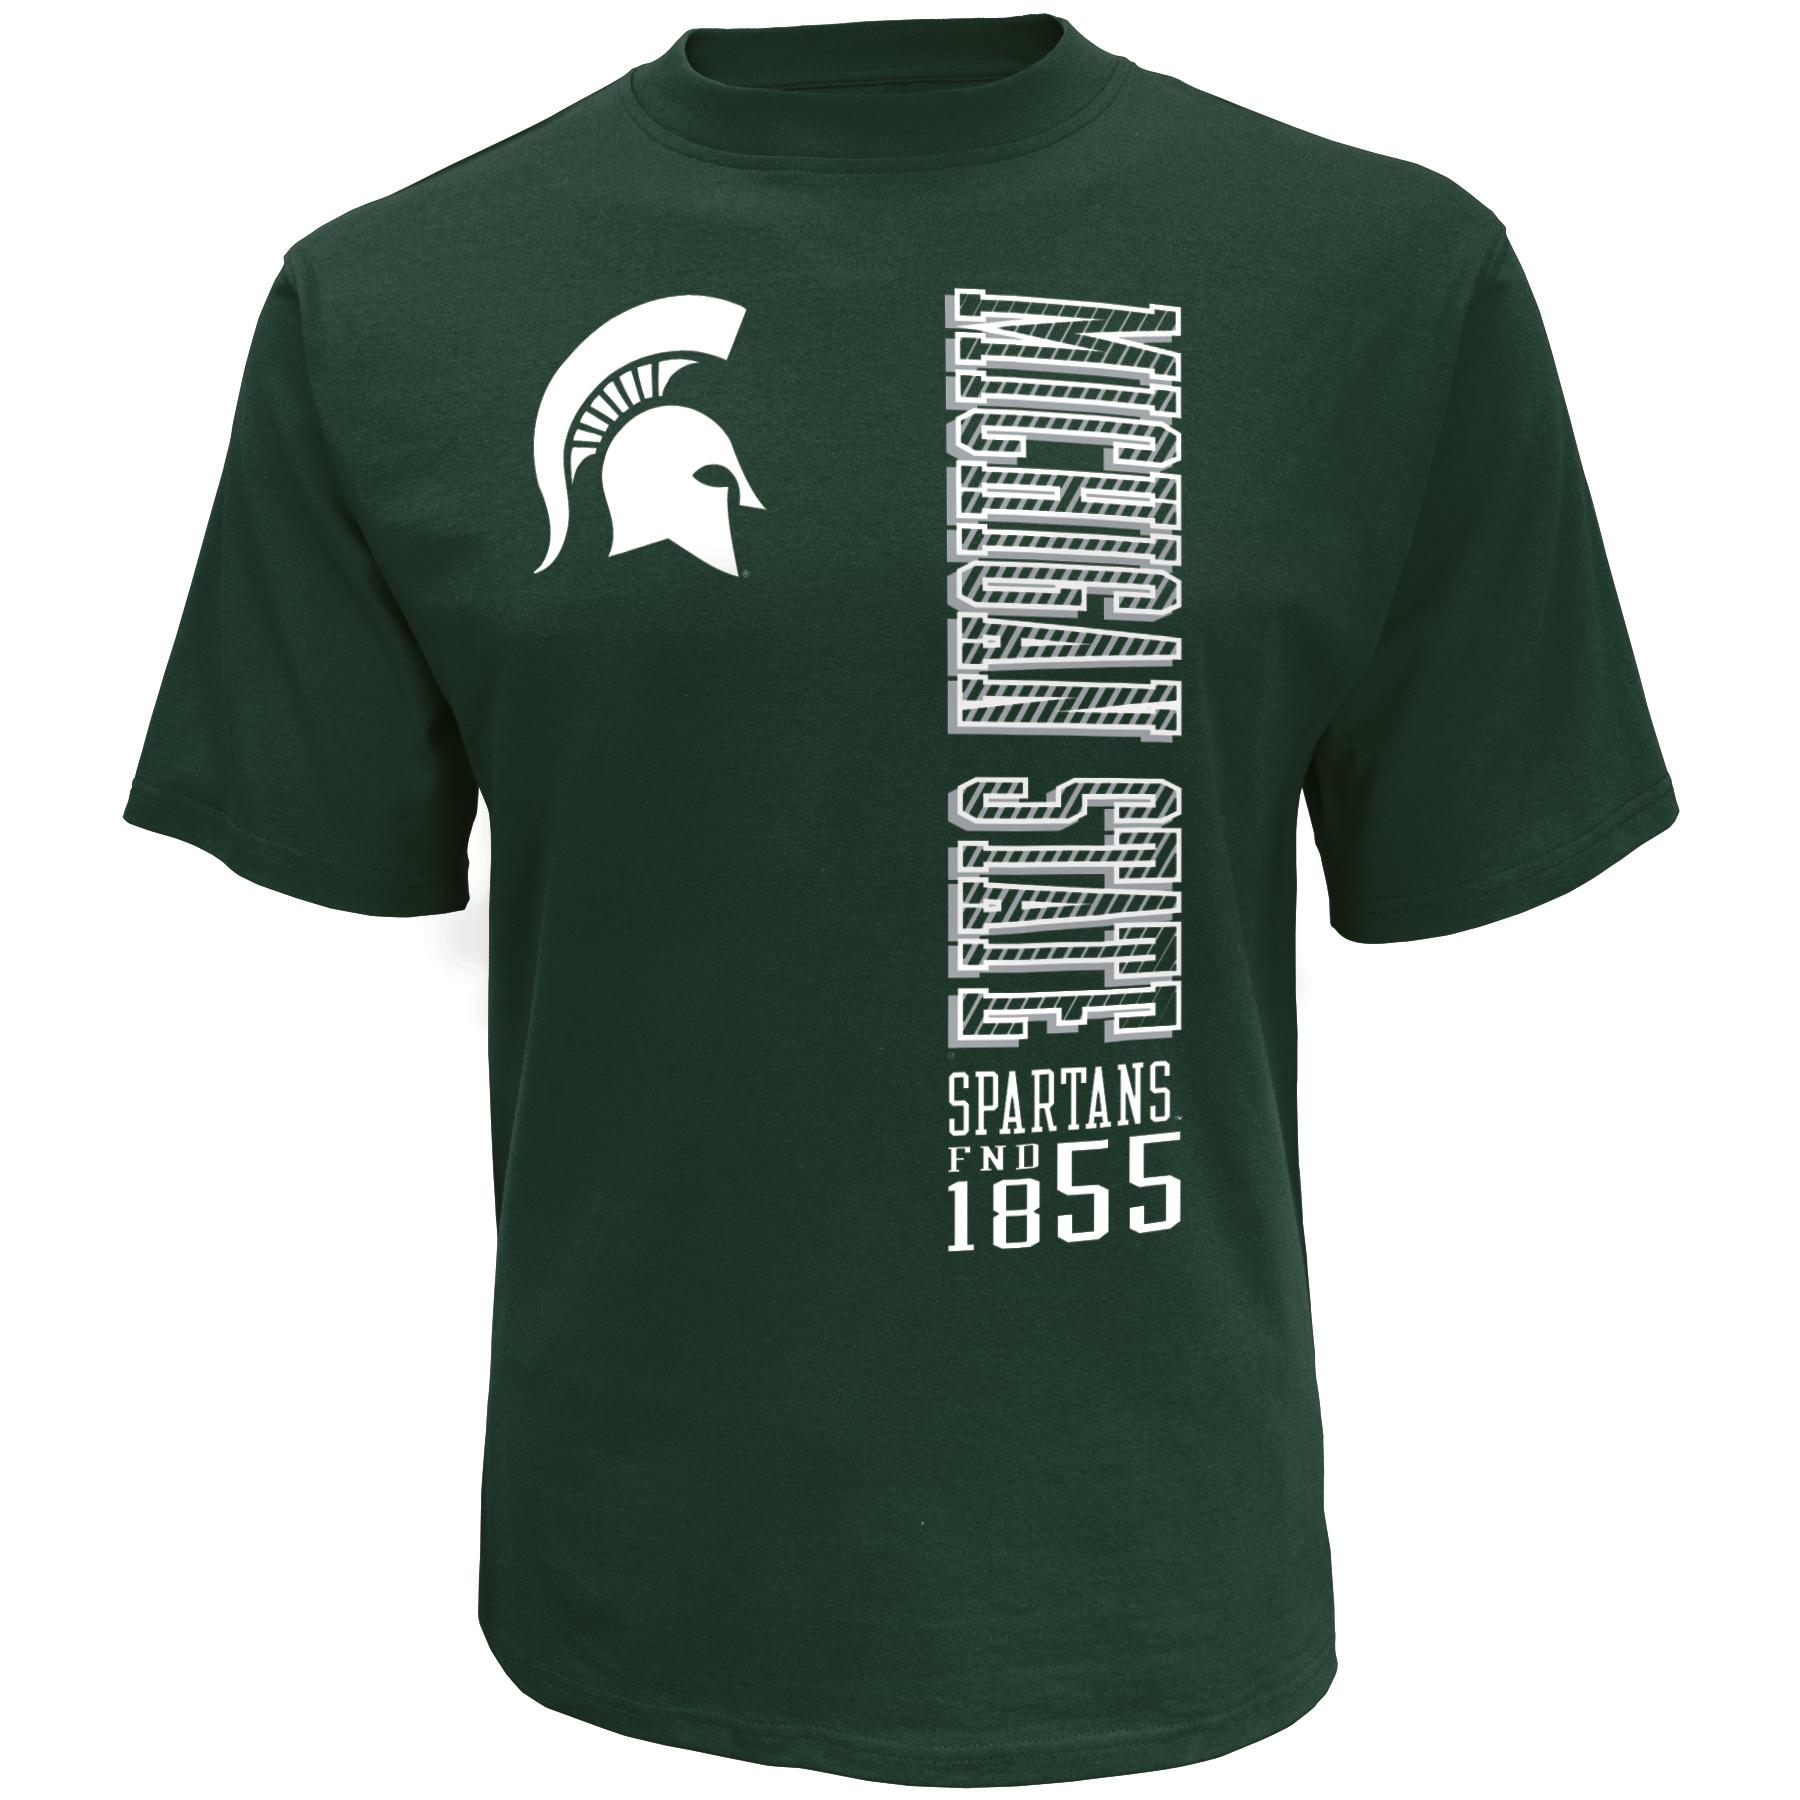 NCAA Men's Big & Tall Graphic T-Shirt - Michigan State Spartans